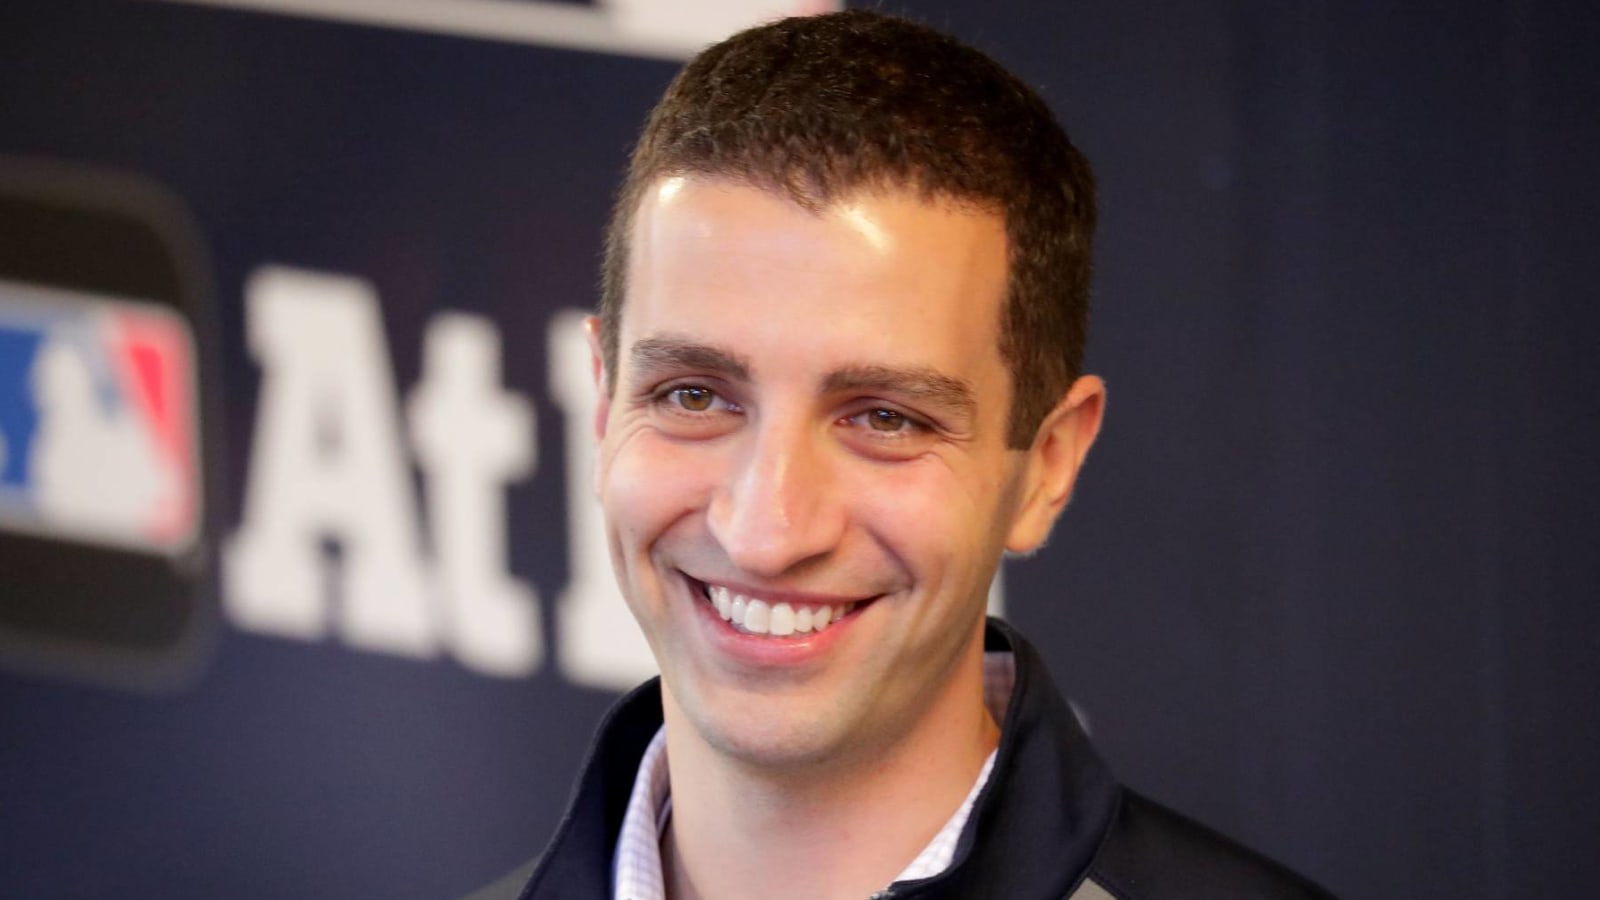 Brewers' David Stearns' contract reportedly ends in 2020